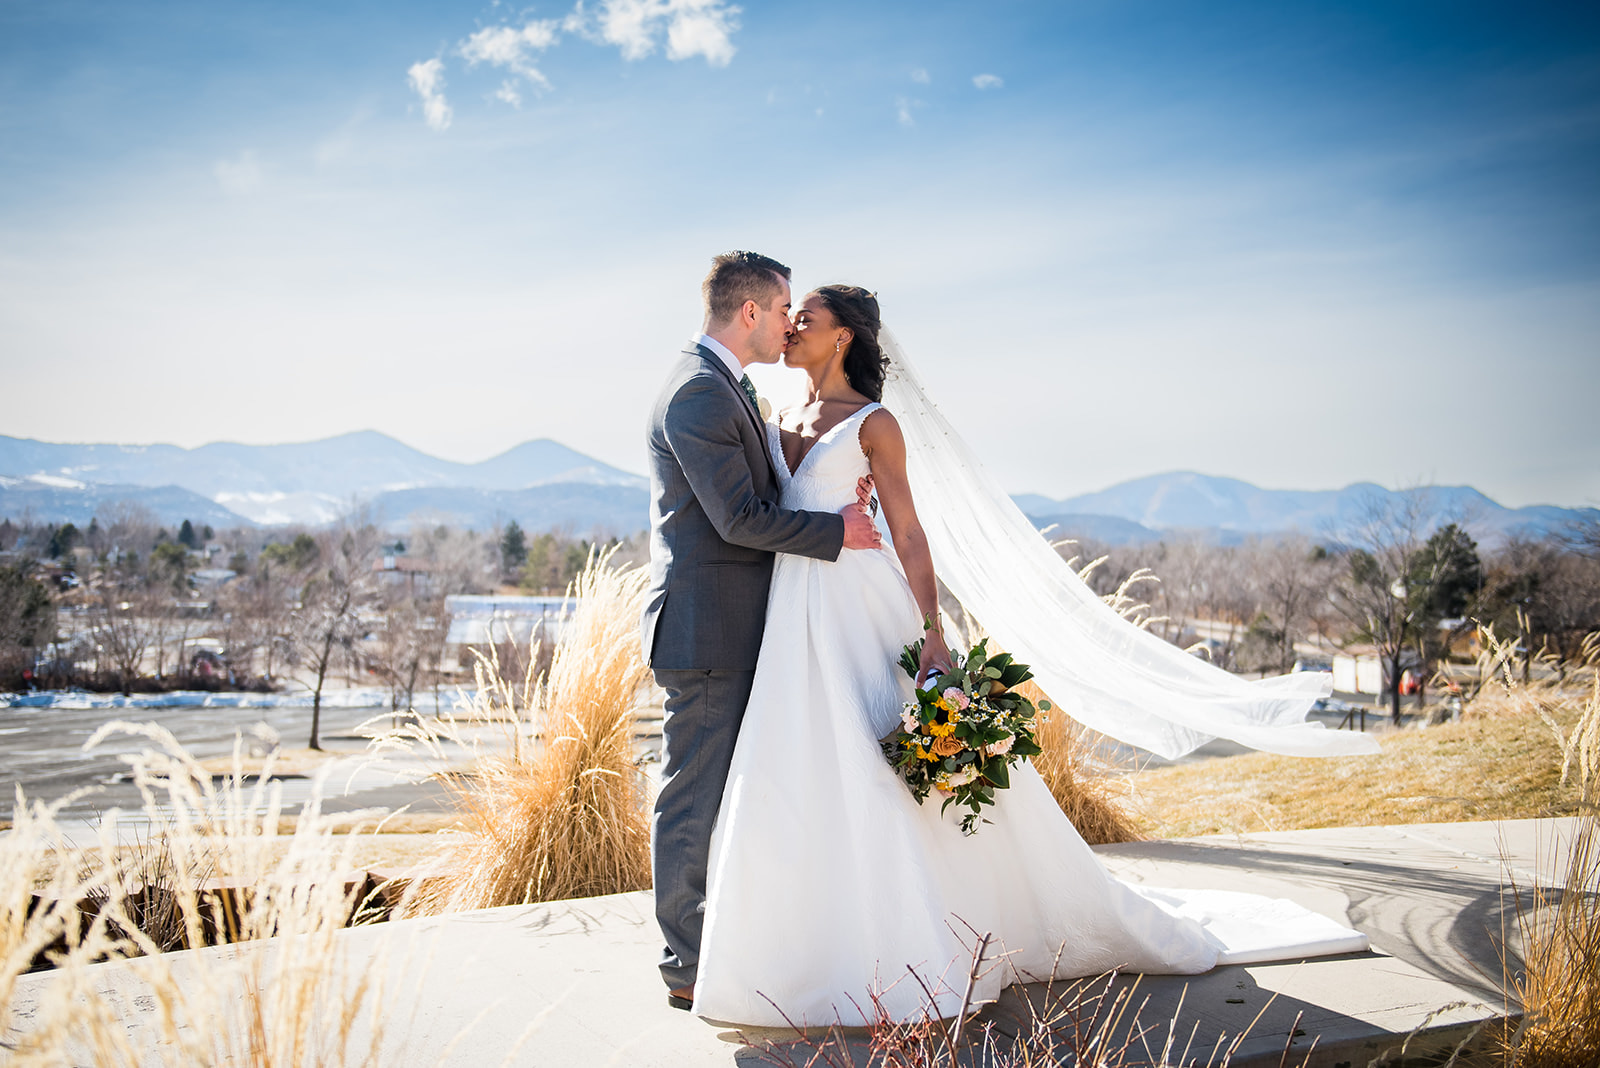 Bride and groom share a kiss with a mountain backdrop as the veil floats in the wind.